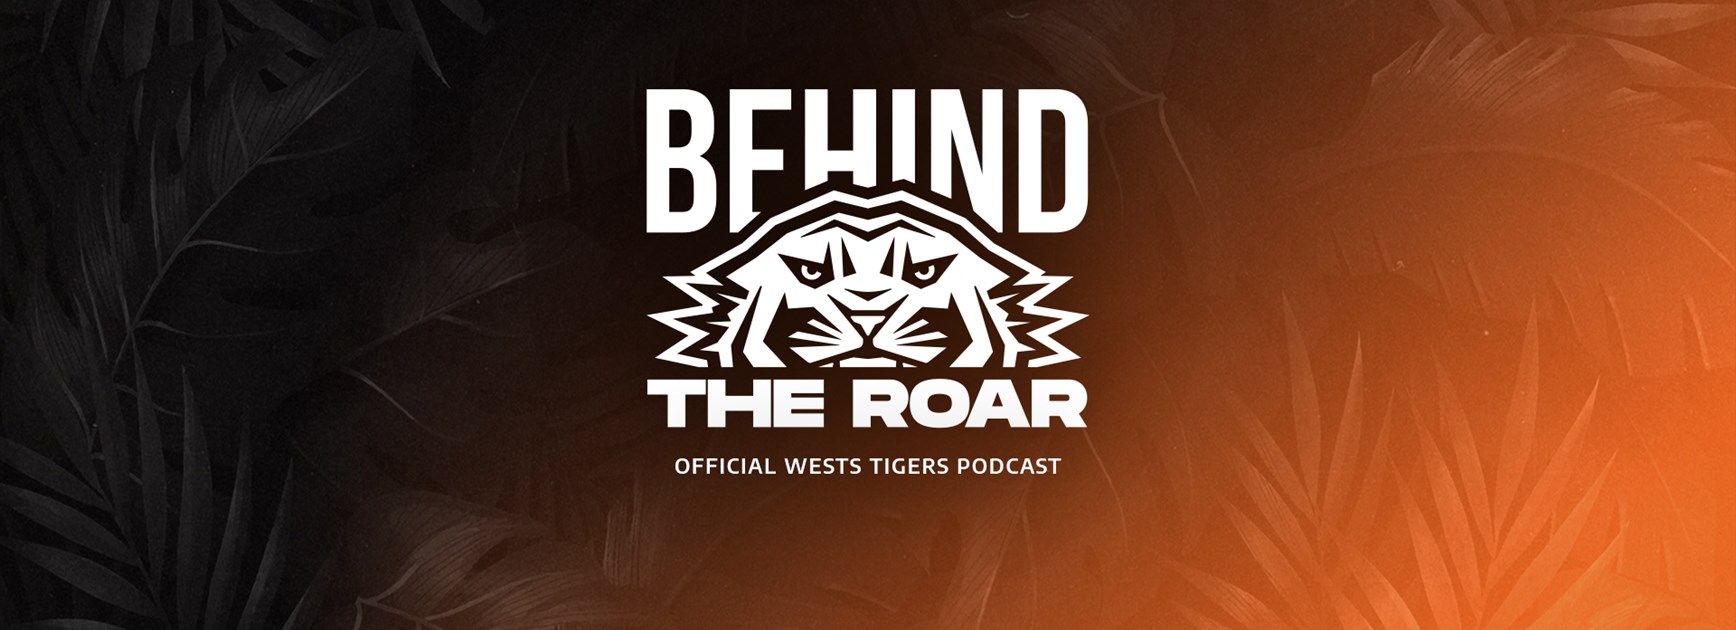 Robbie Farah launches new Wests Tigers podcast